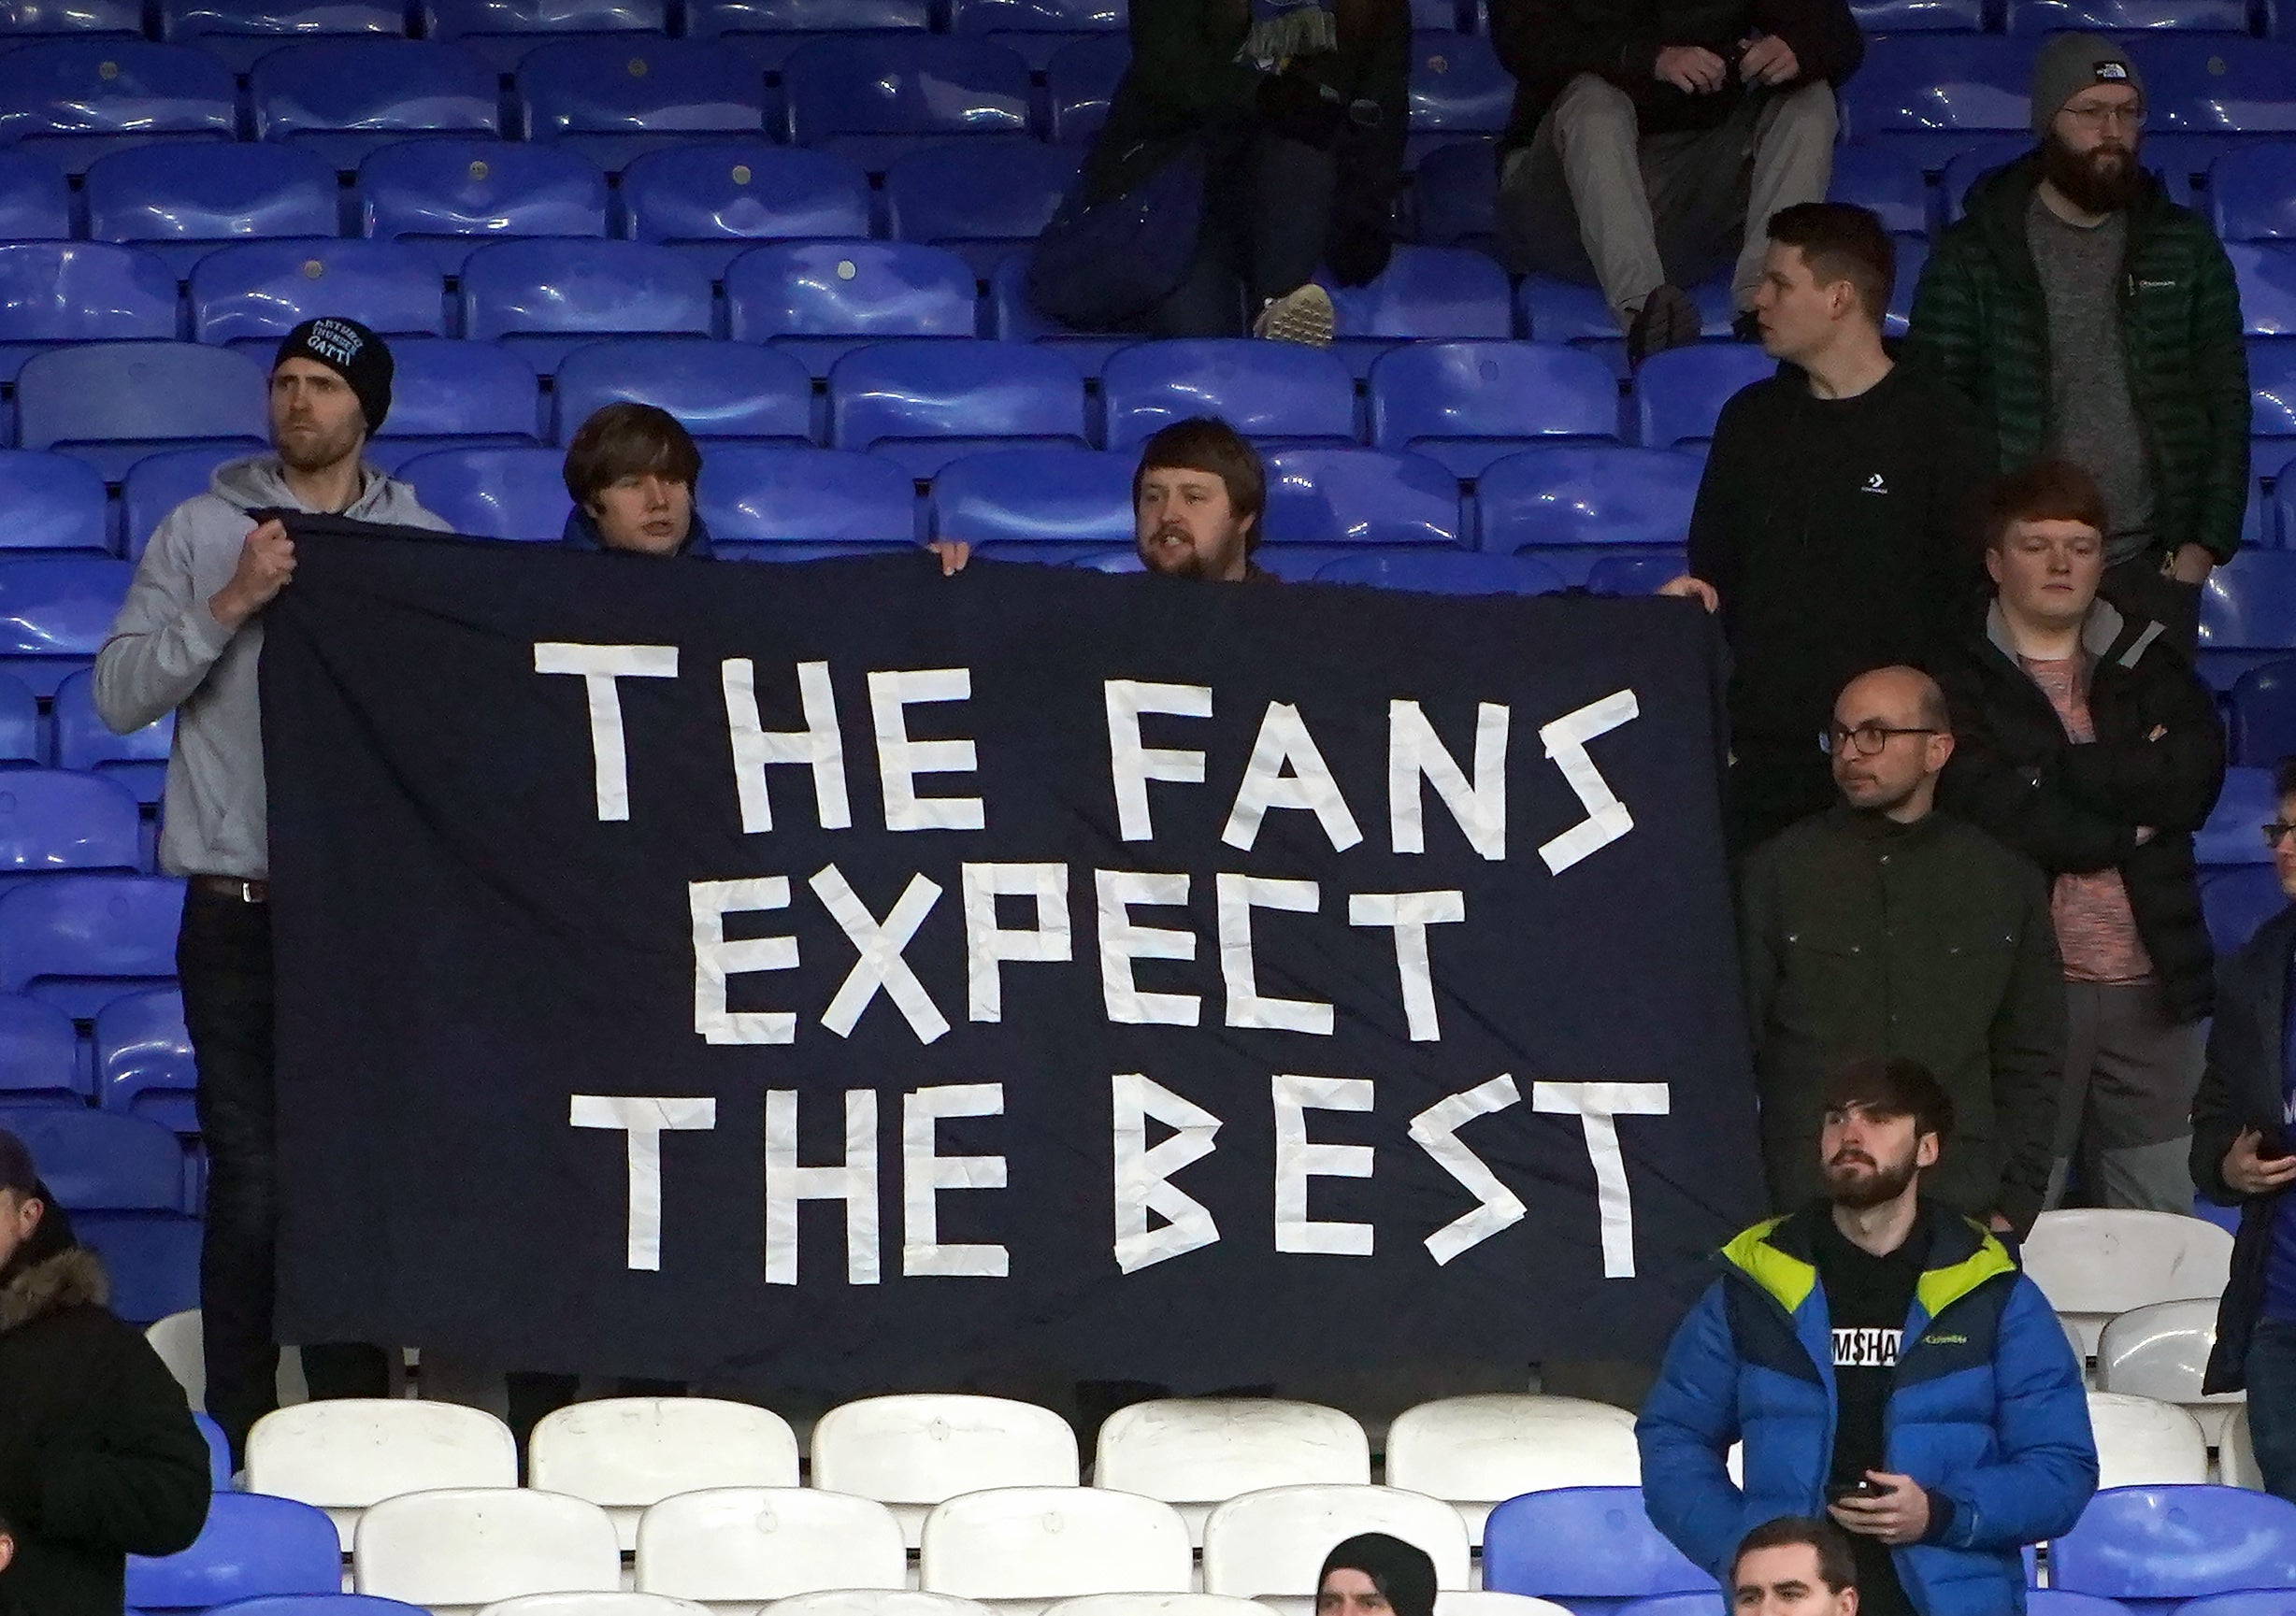 Everton fans staged a sit-in protest after Saturday’s defeat to Aston Villa (Peter Byrne/PA)